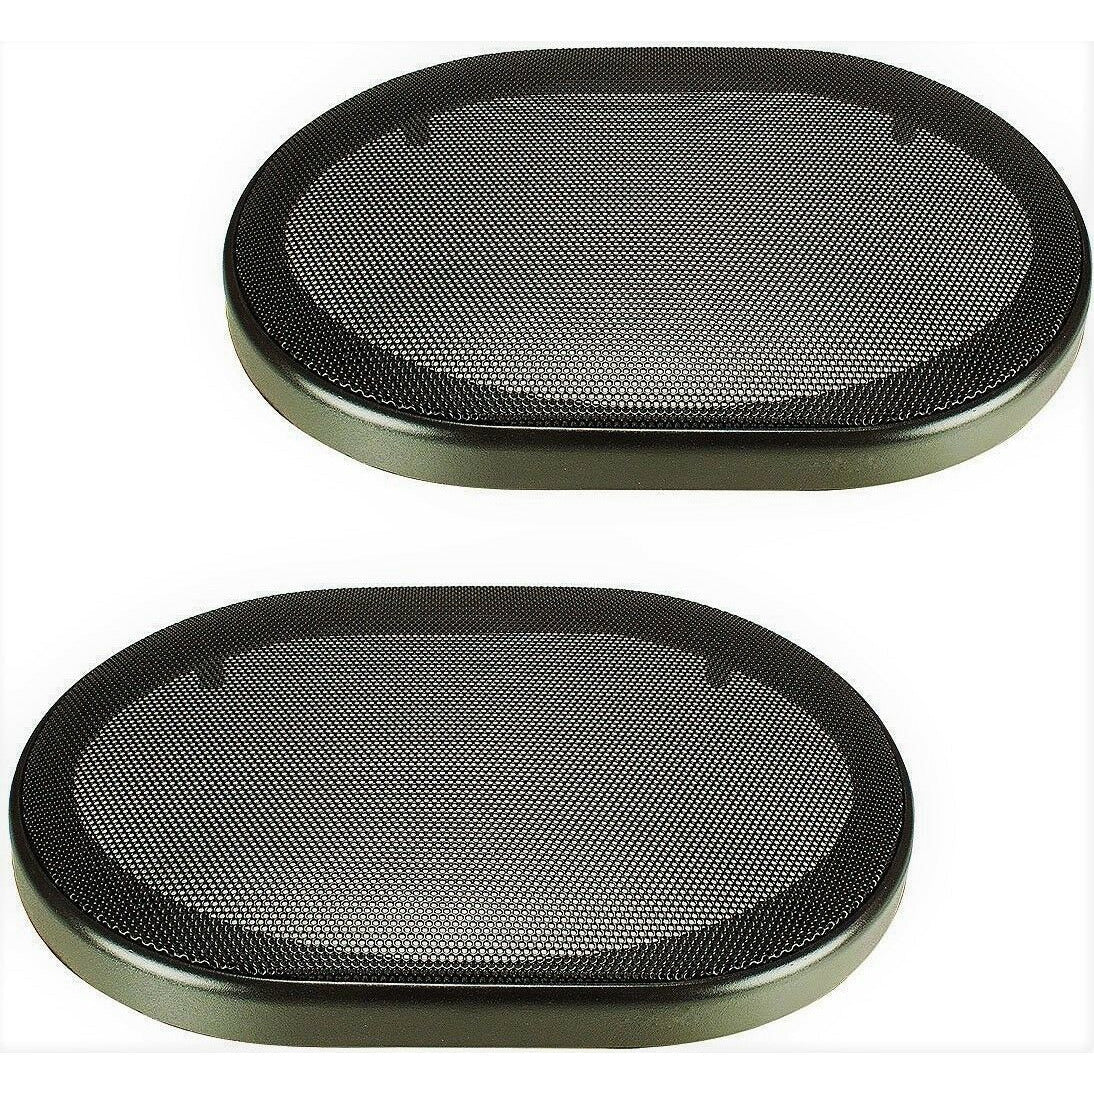 2 American Terminal CS6x9 Universal 6x9" Car Speaker Coaxial Component Protective Grills Covers